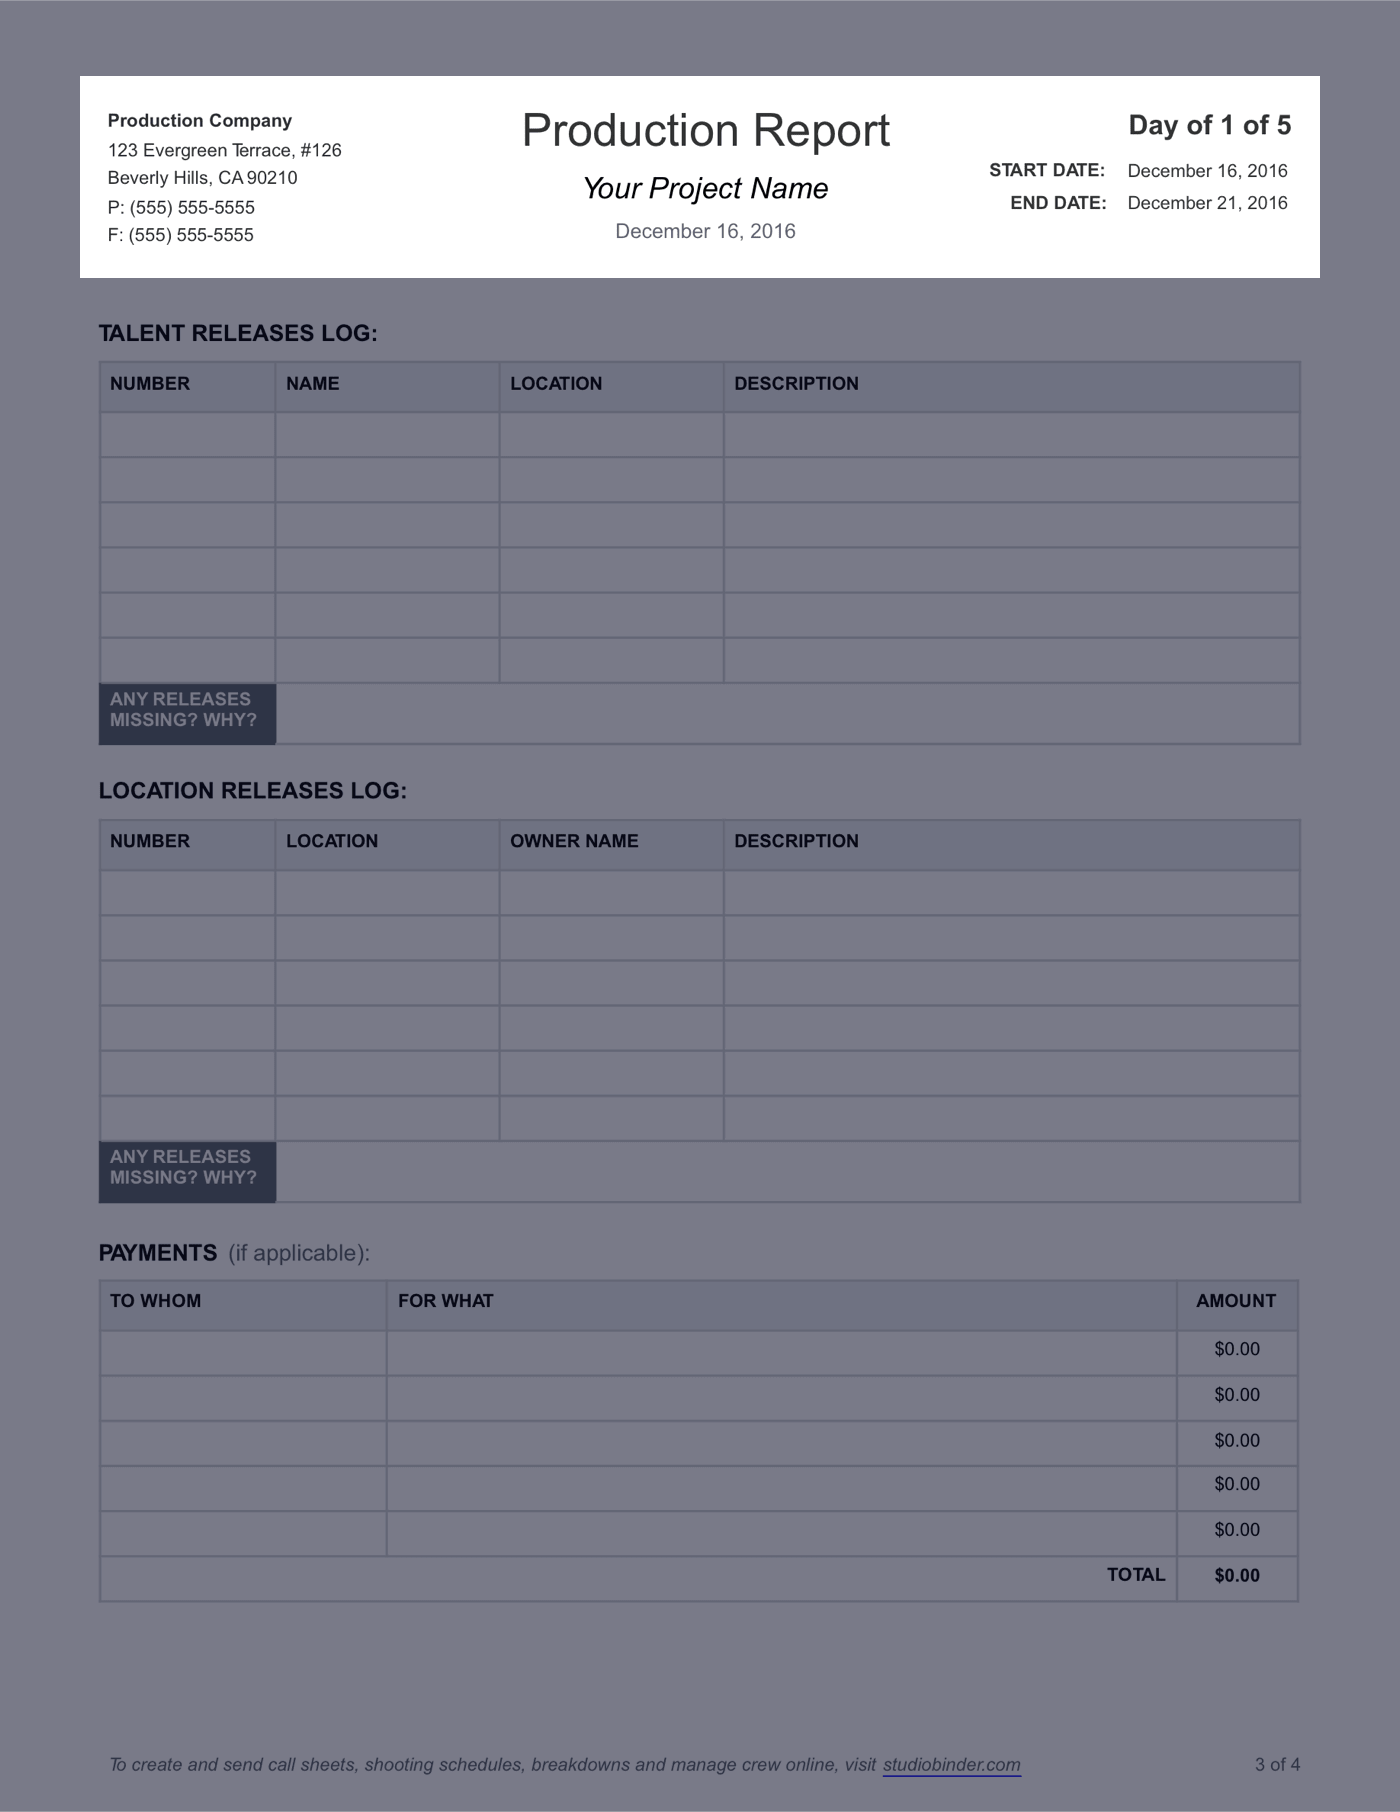 Daily Production Report Template - 08 - StudioBinder